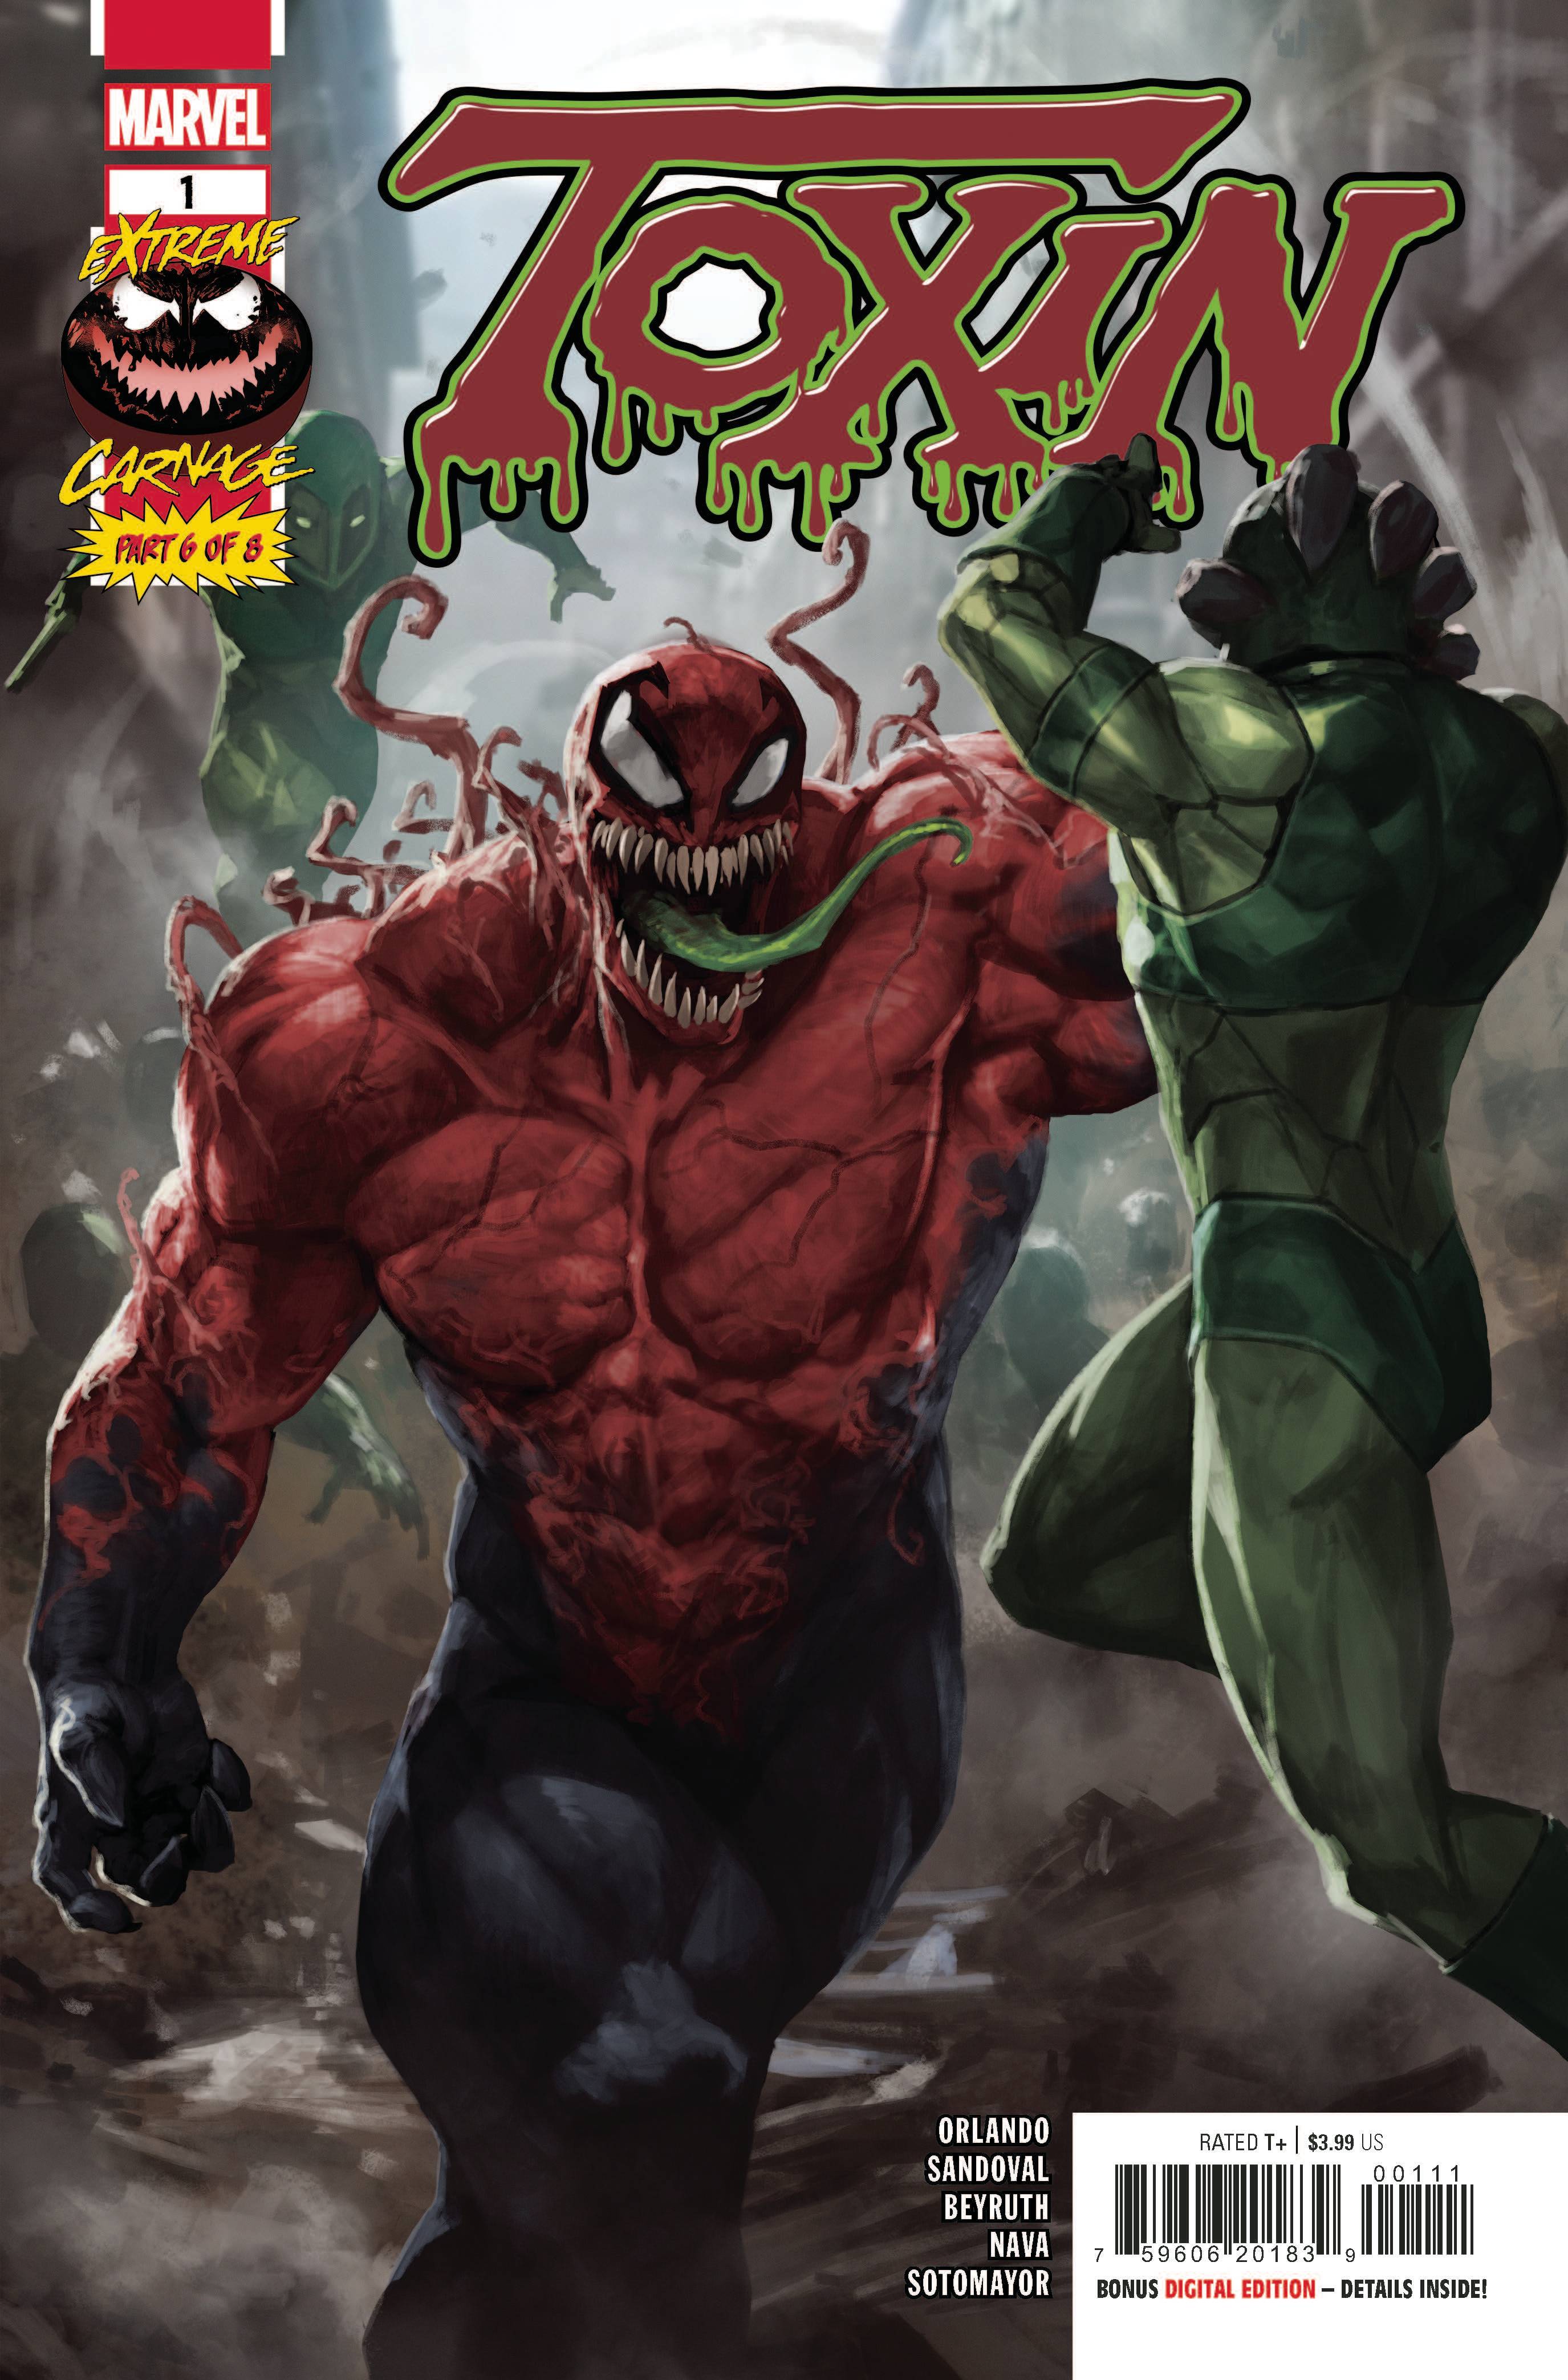 EXTREME CARNAGE TOXIN #1